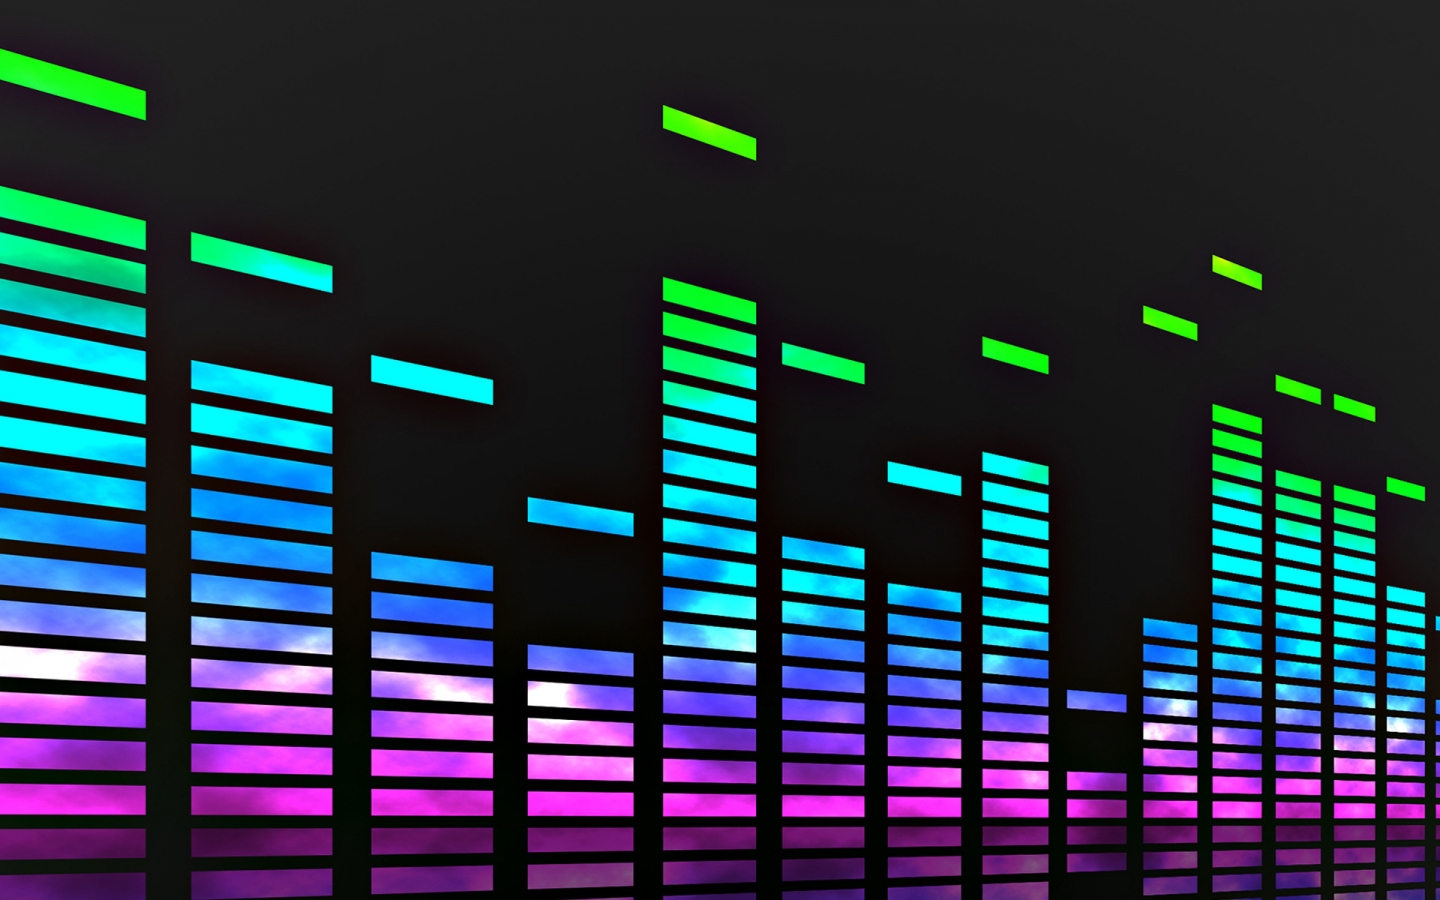 Colorful Equalizer for 1440 x 900 widescreen resolution